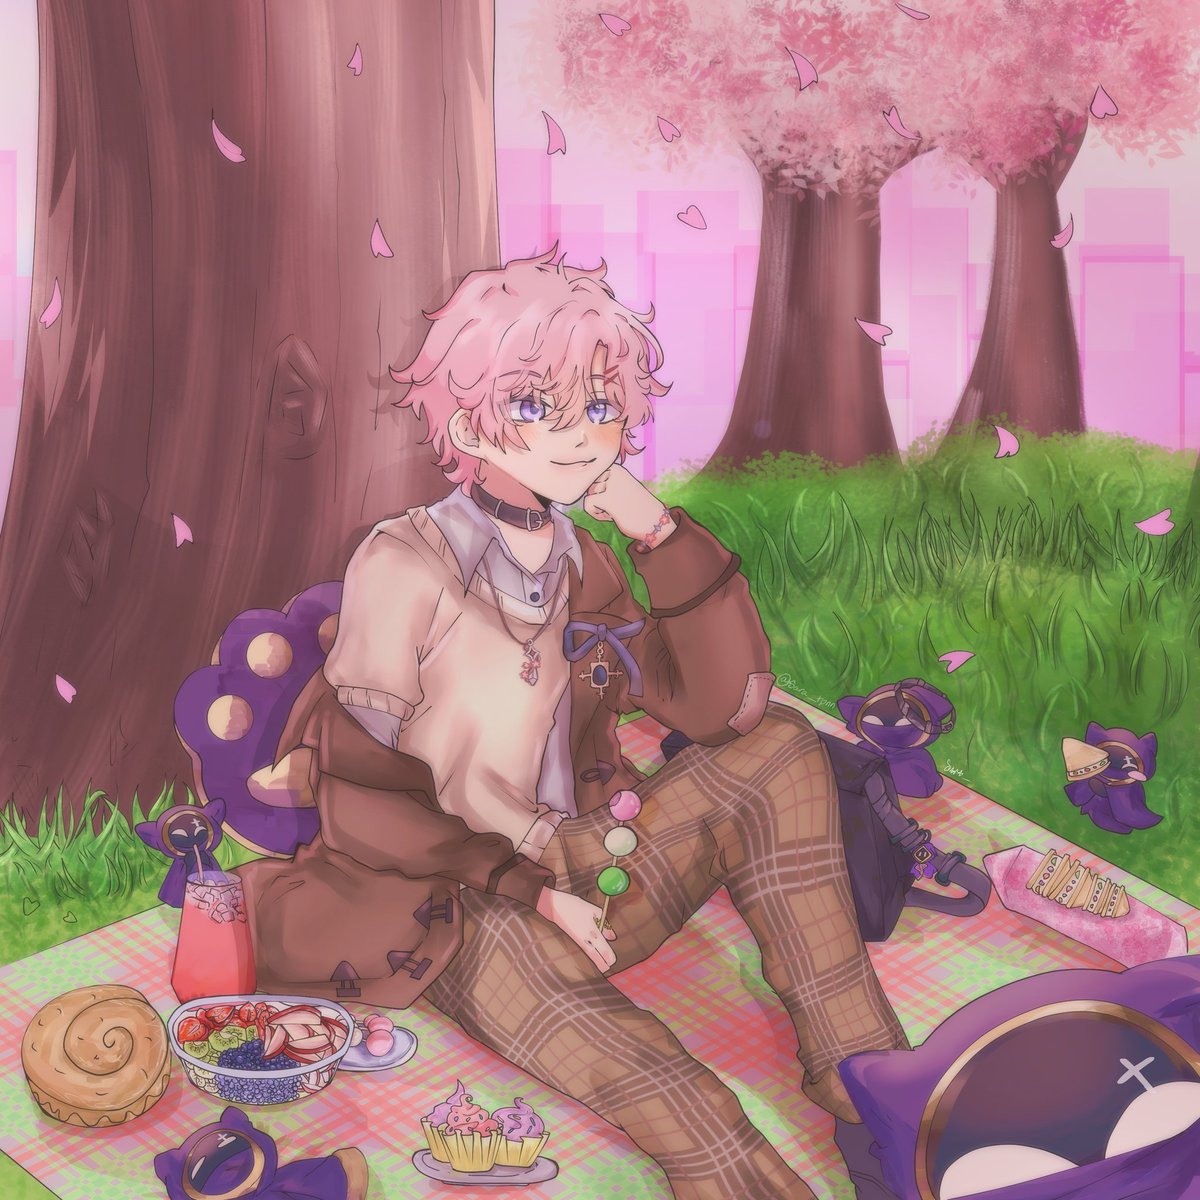 My entry for Shoto's art contest ✨💜🌸 #SpringShoto